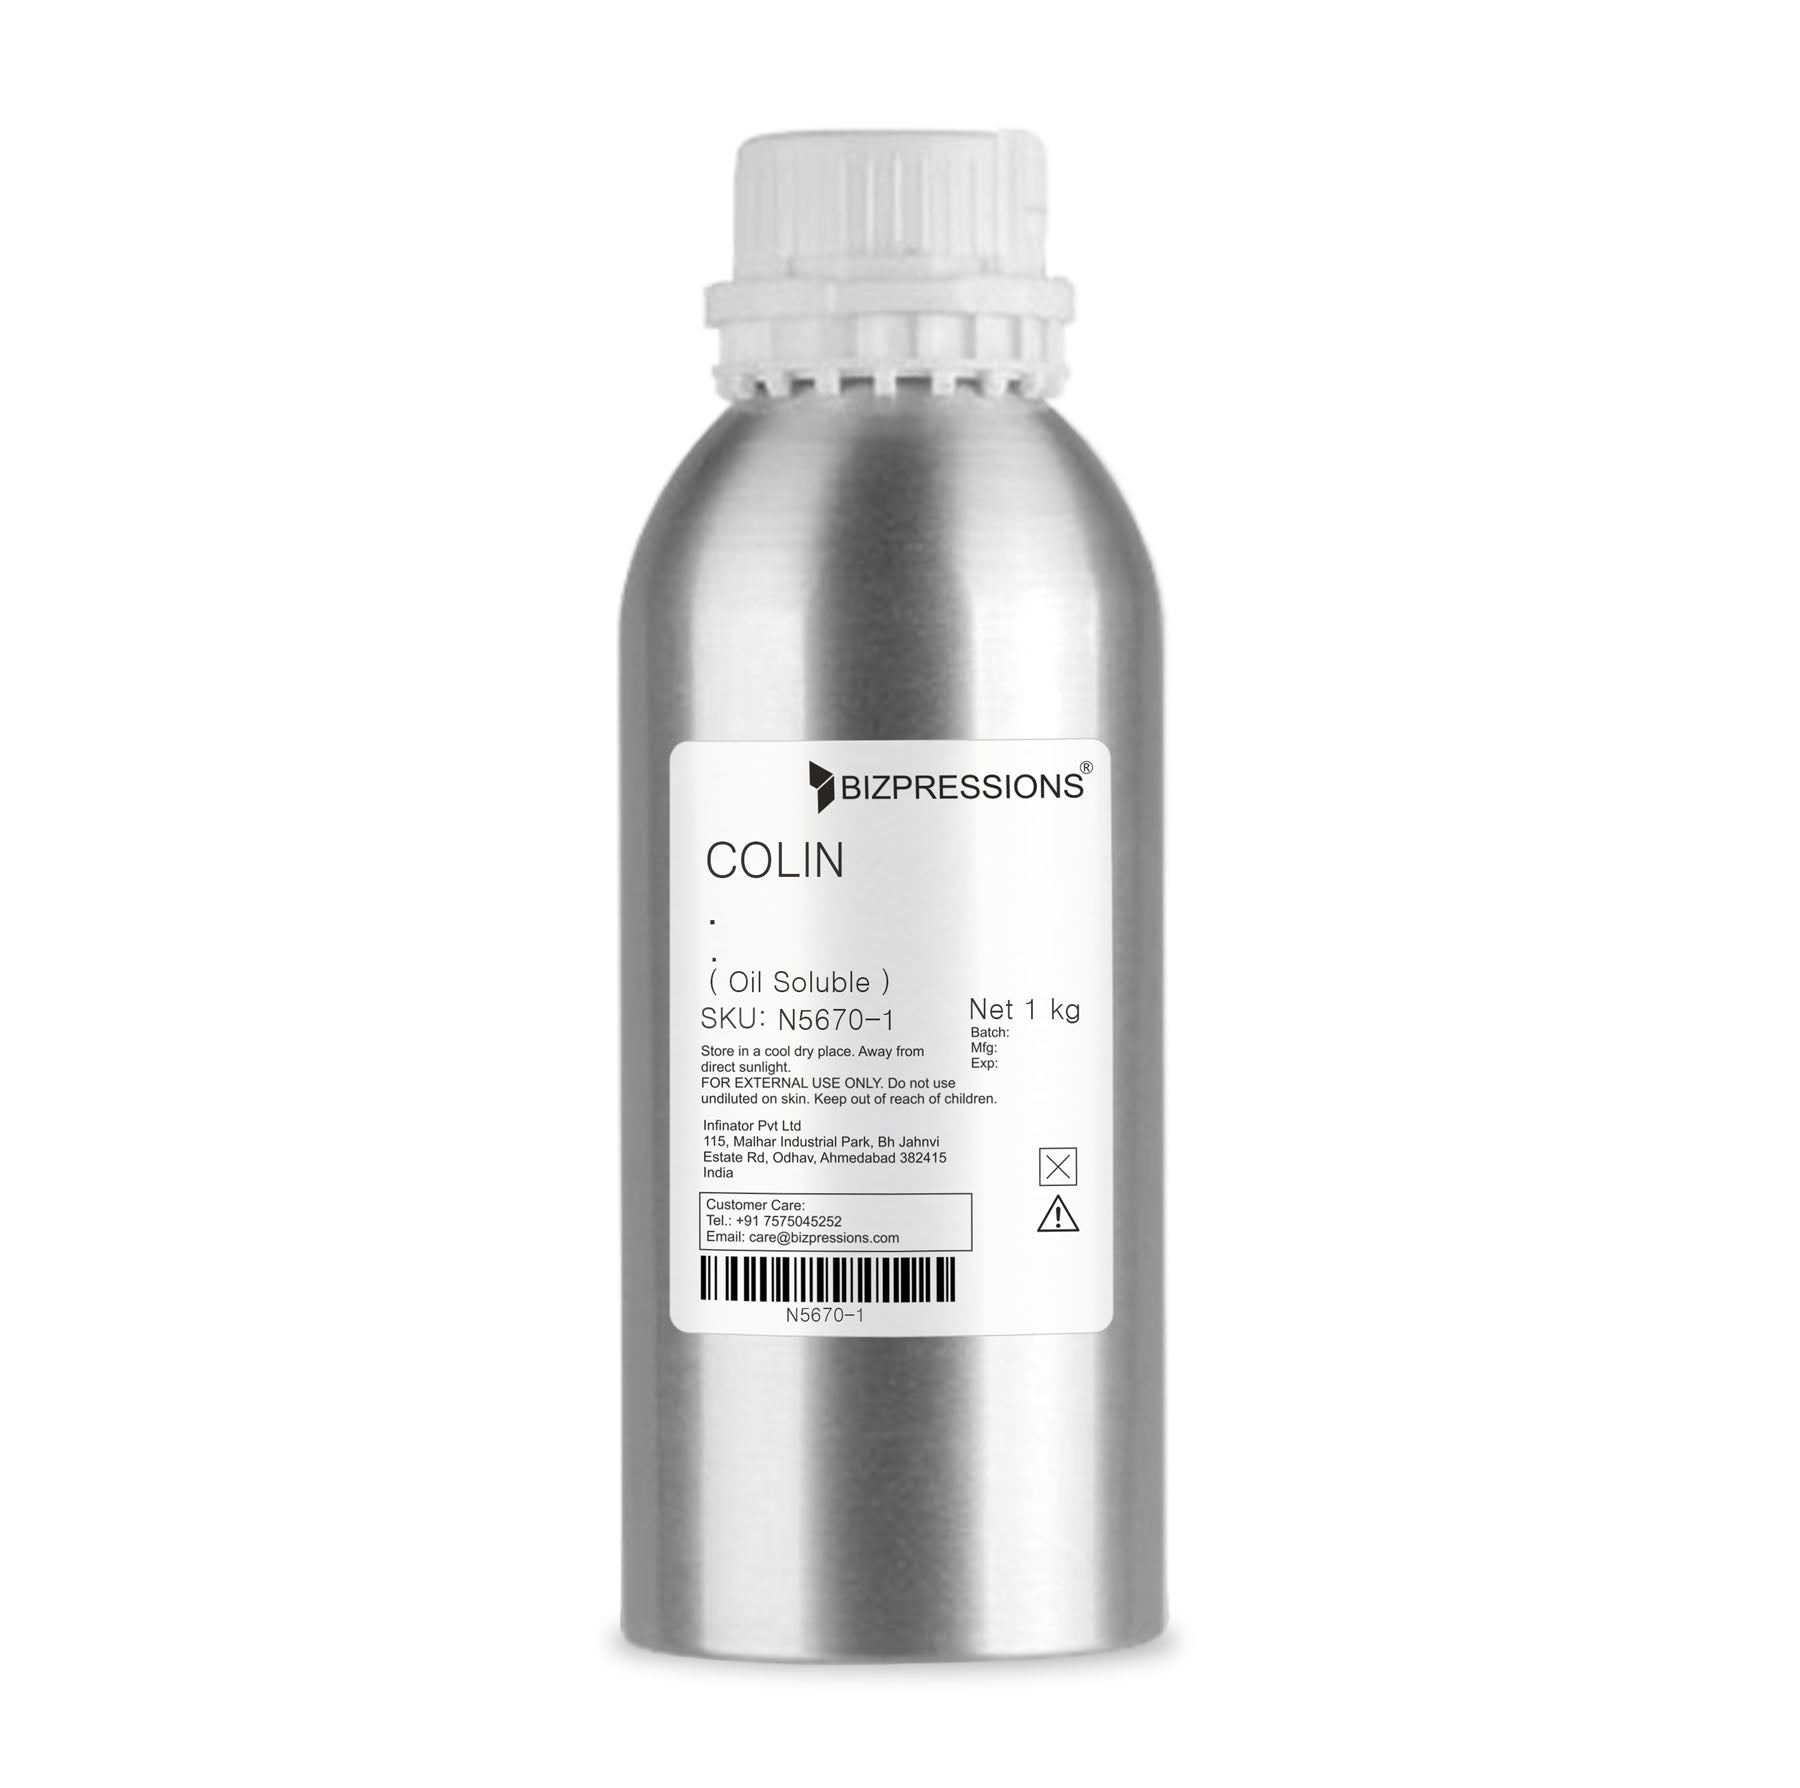 COLIN - Fragrance ( Oil Soluble ) - 500 gm